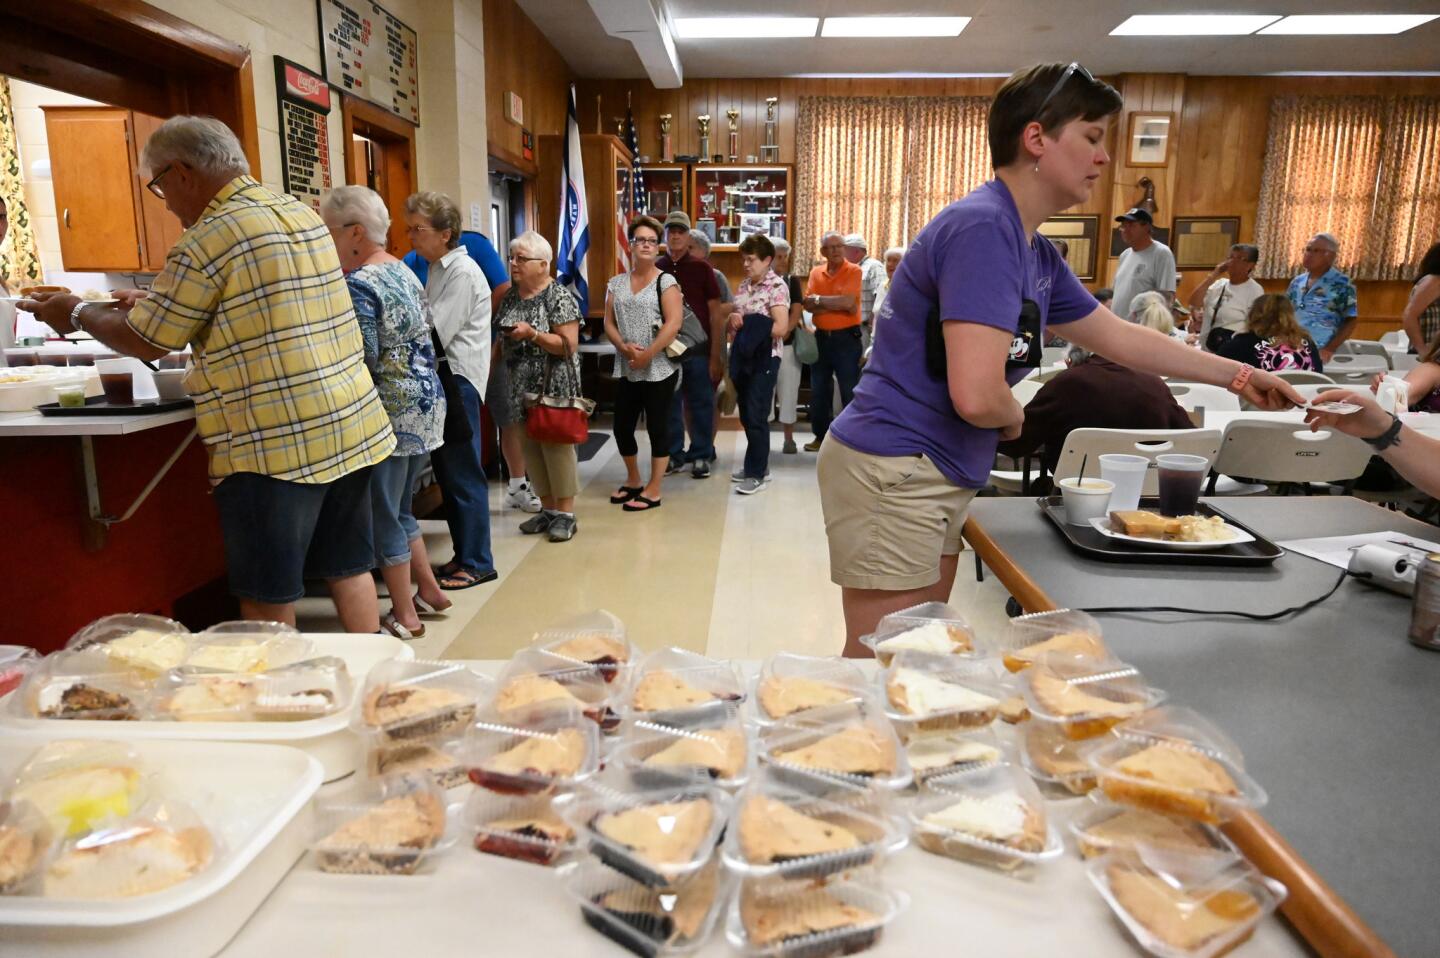 Diane Day, right, purchases a meal as a line of hungry people wait their turn during the carnival at the Harney Volunteer Fire Company on Tuesday. Day, a past resident of Harney, travelled from her current home of Charlestown, WV, to support her former community.